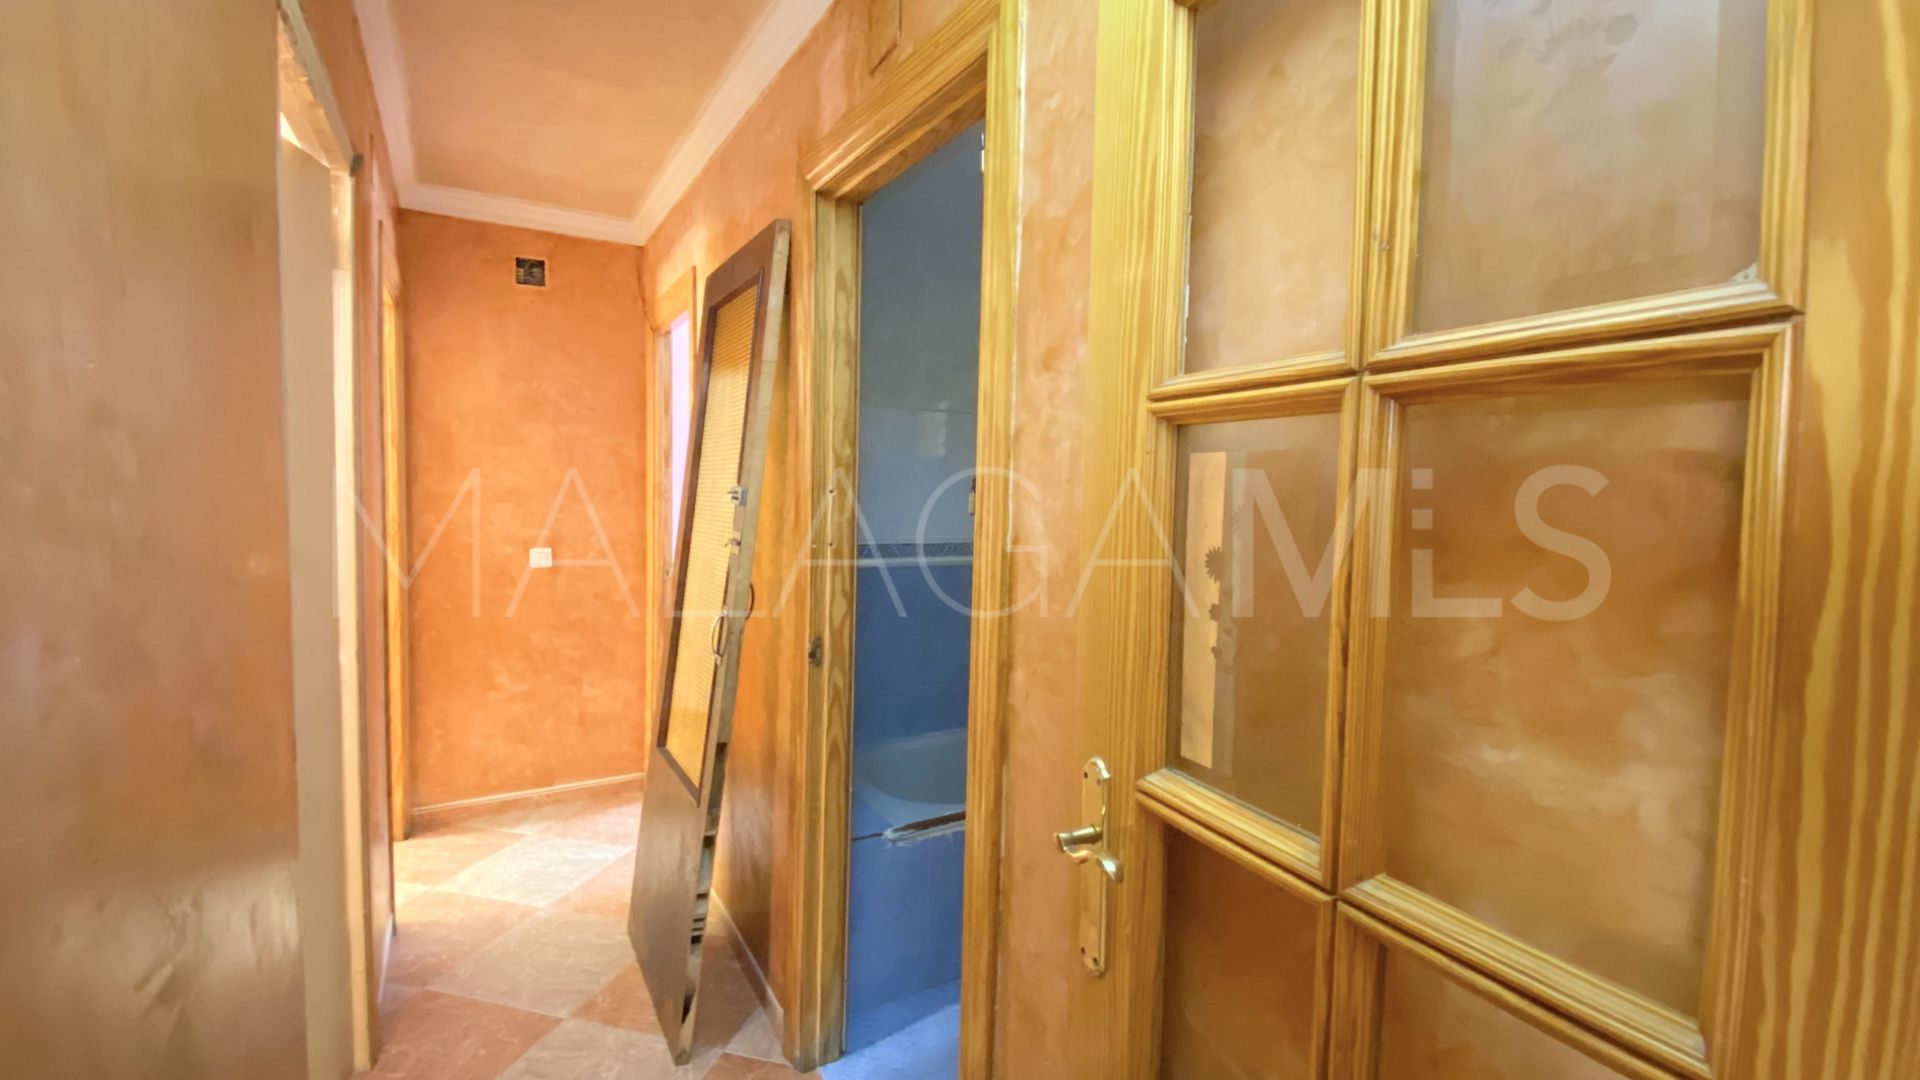 Ground floor apartment in Palma - Palmilla for sale